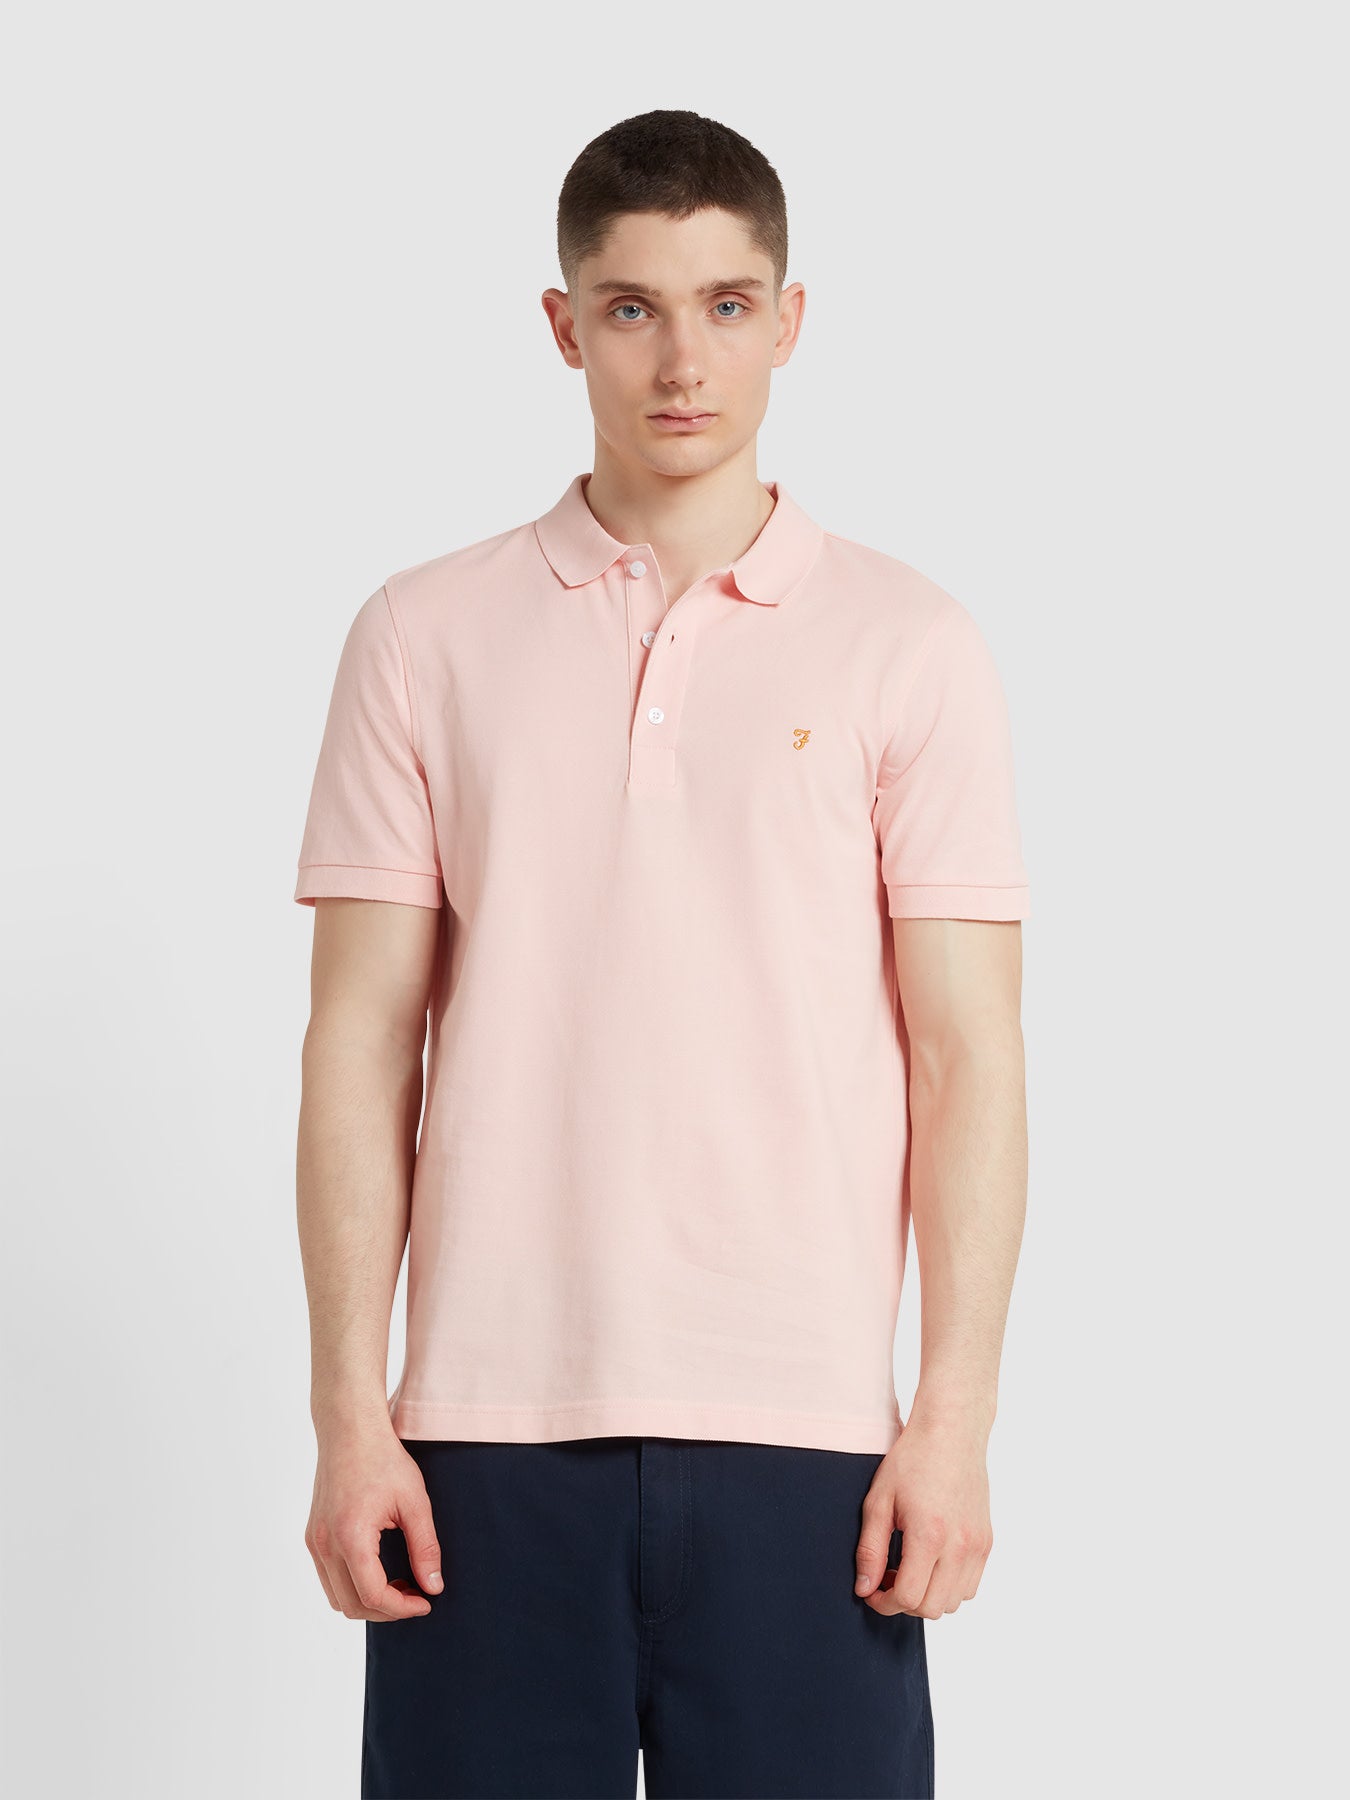 View Blanes Organic Cotton Short Sleeve Polo Shirt In Powder Pink information